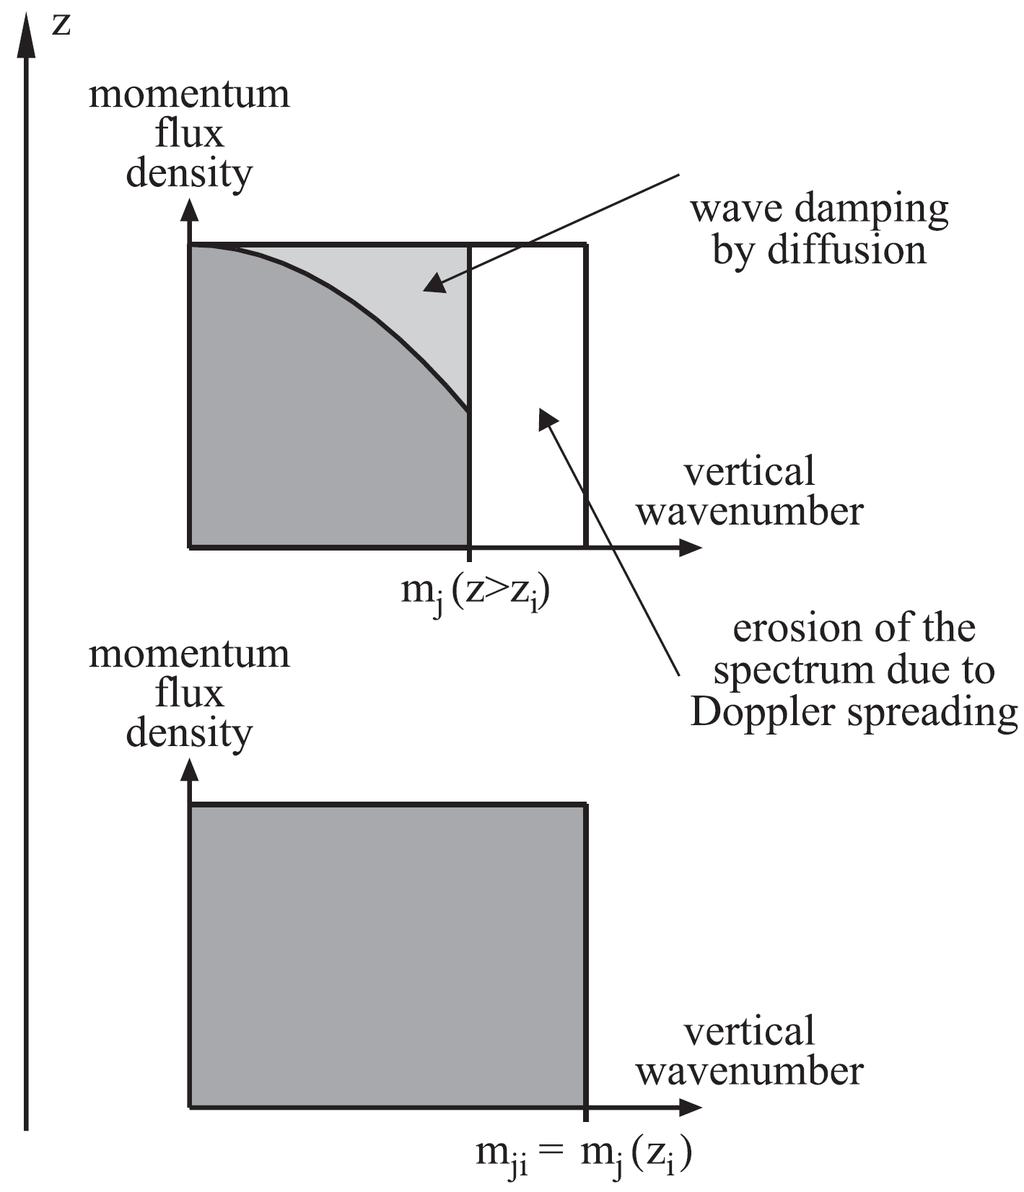 Extending the Doppler-spread parameterization (DSP) by the consistent interaction of GWs and turbulence Conventional: Erosion of the spectrum causes energy desposition that induces turbulent